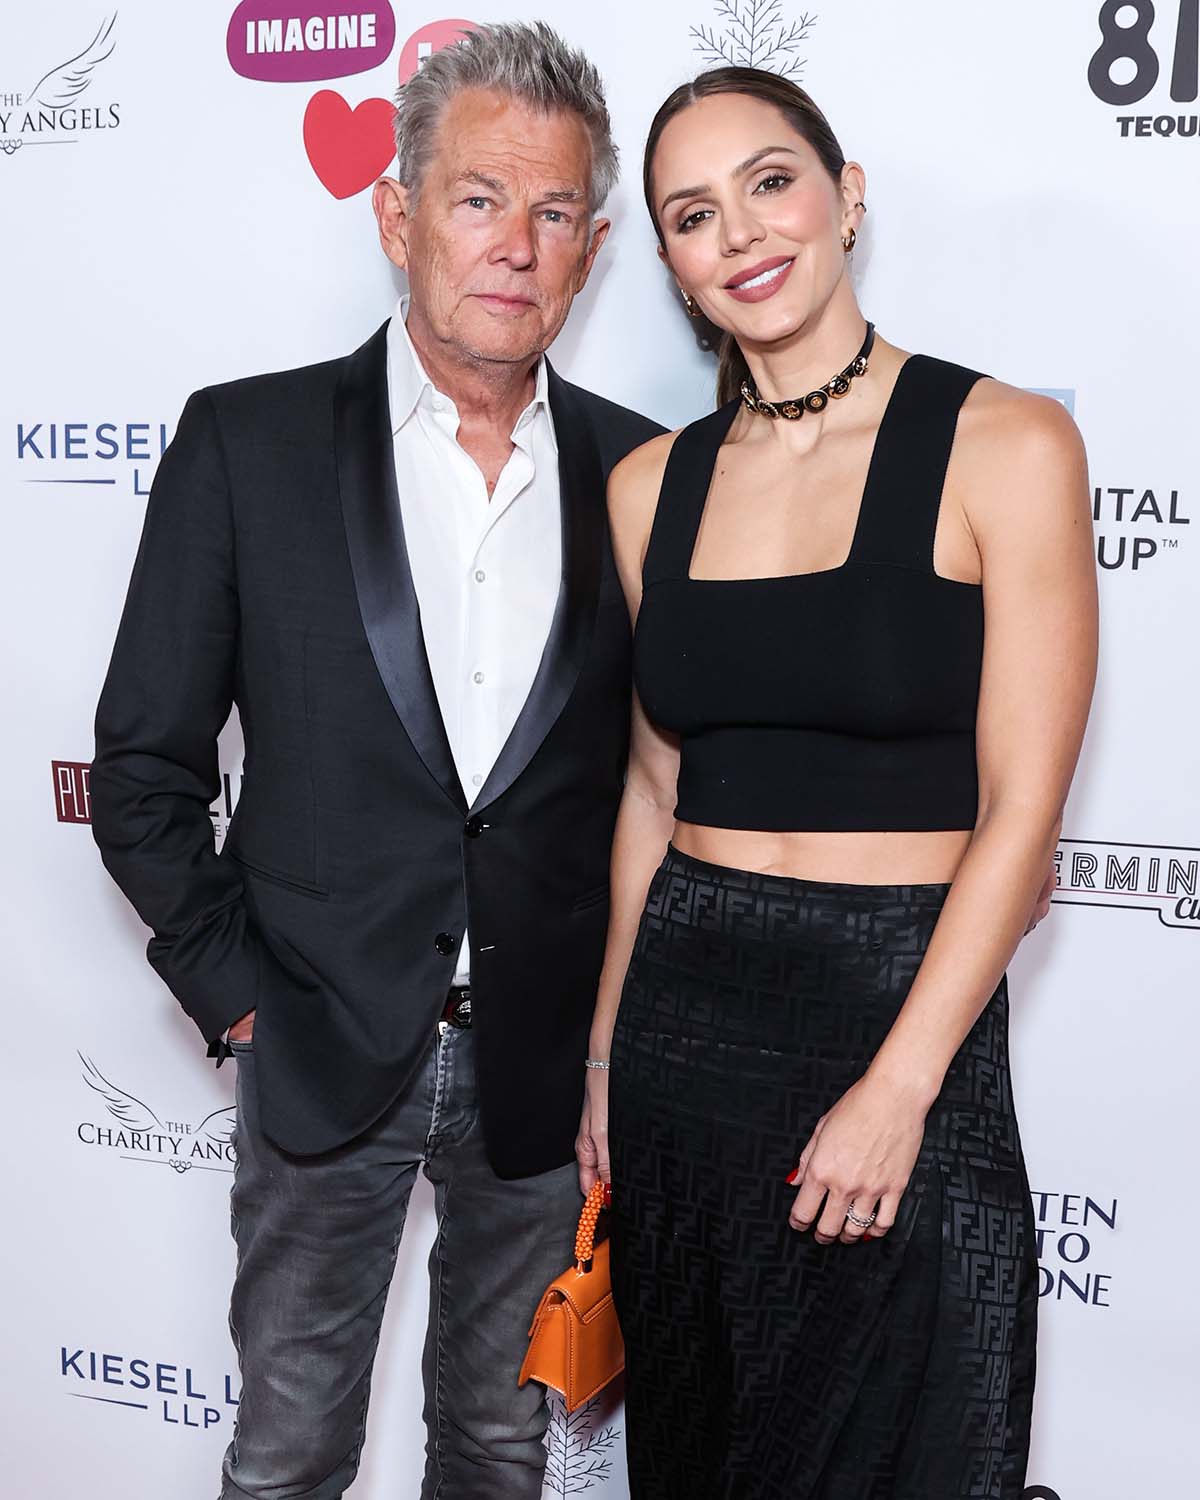 Katharine McPhee and David Foster Have a 'Simple' Way of Staying Connected